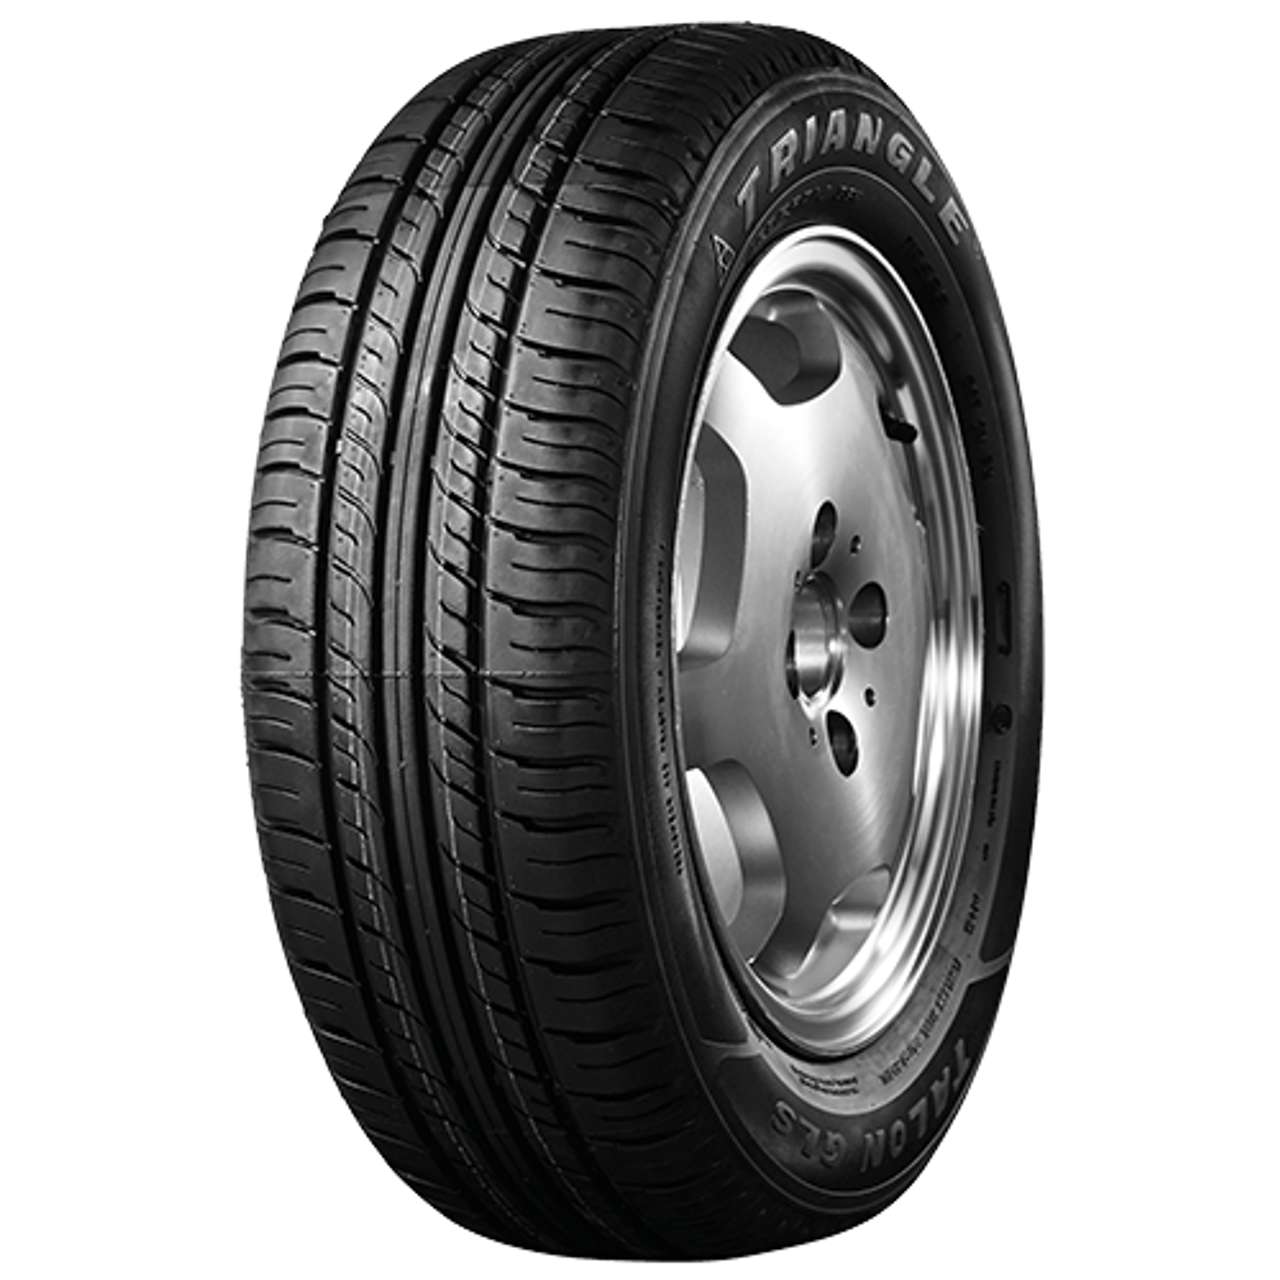 TRIANGLE TR928 155/80R13 79T BSW